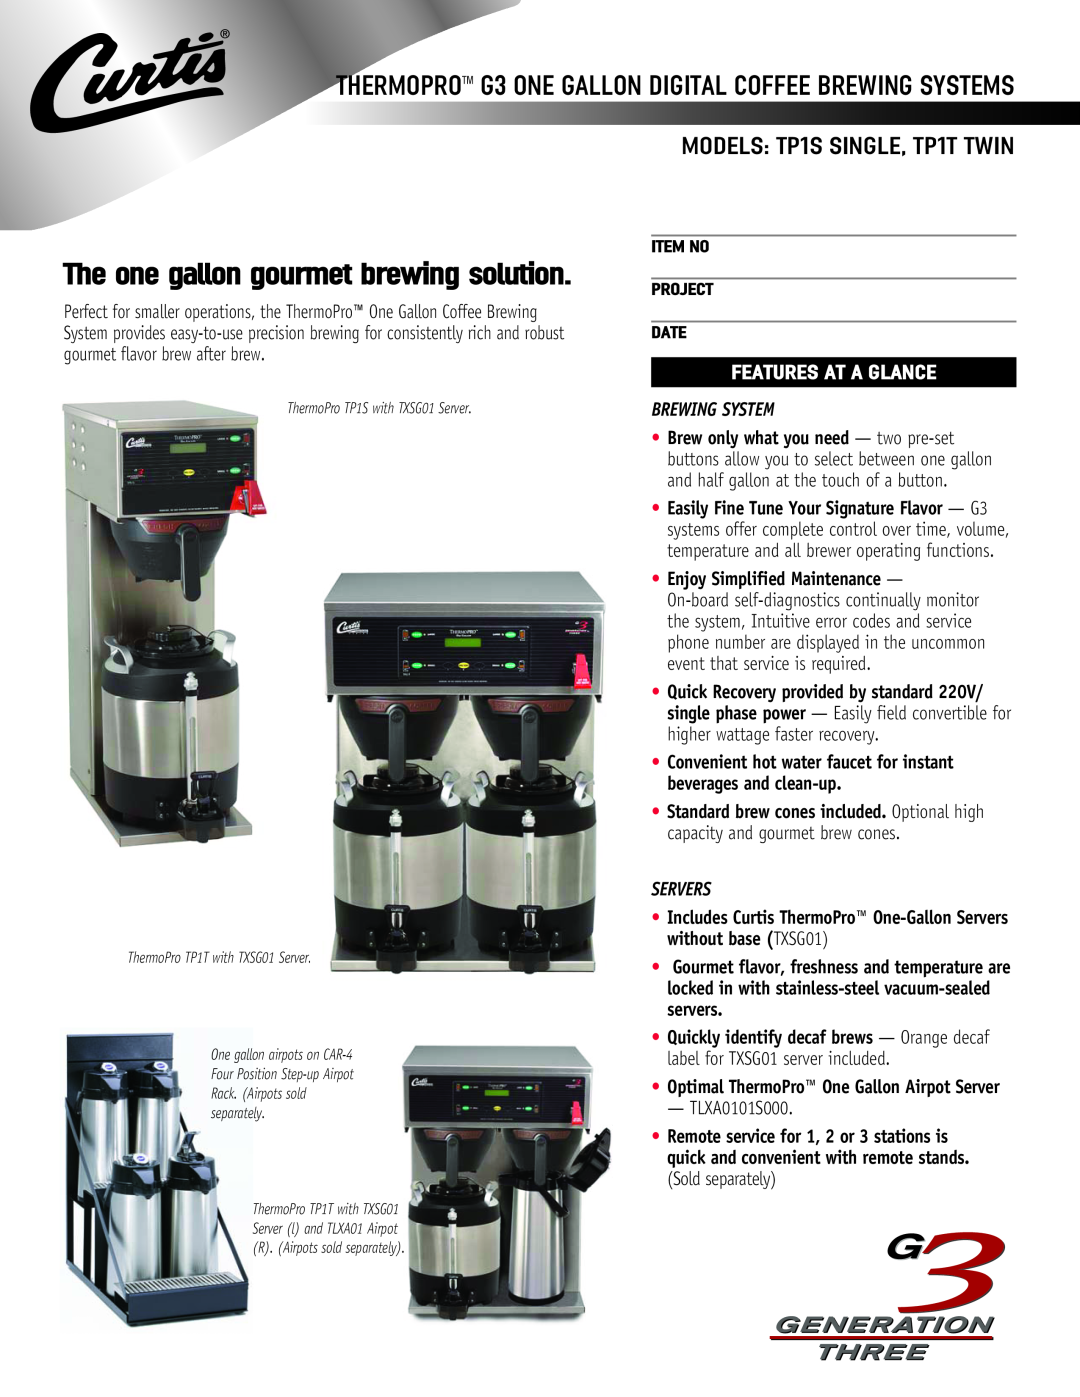 Curtis manual The one gallon gourmet brewing solution, MODELS: TP1S SINGLE, TP1T TWIN, Features At A Glance, Servers 